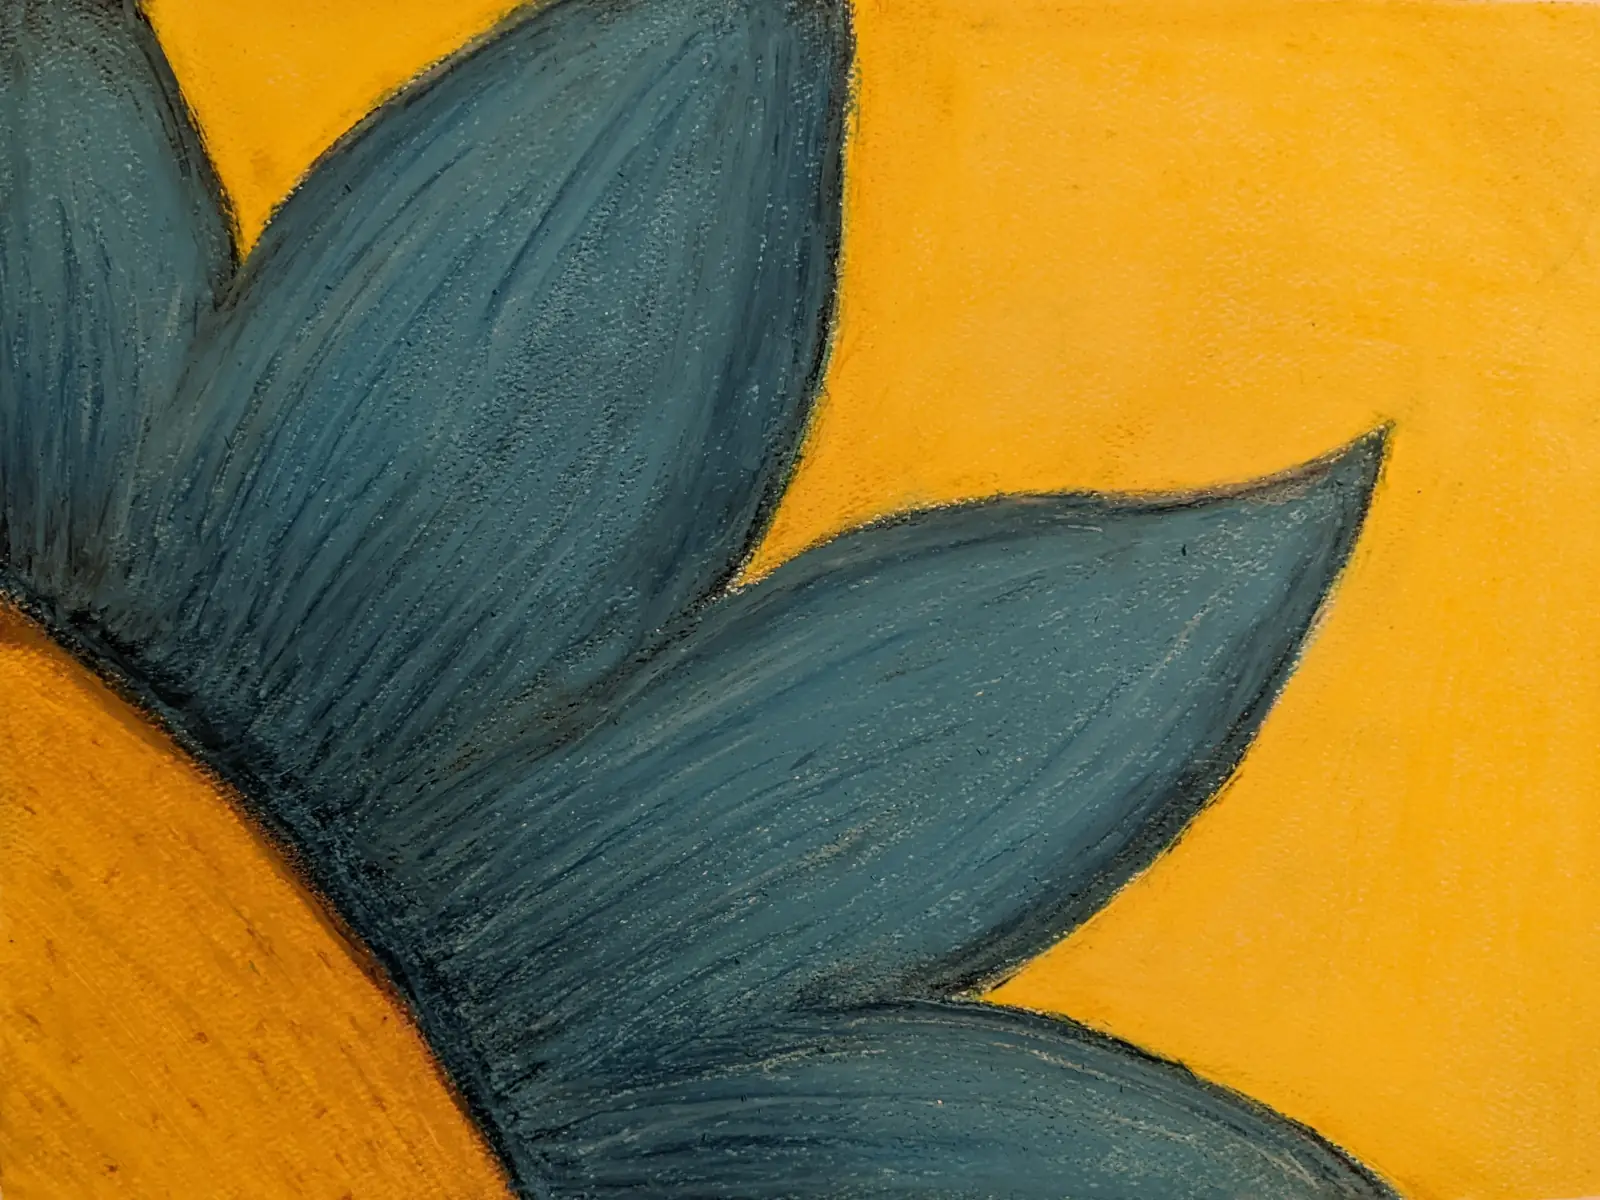 Sunflower emerging from the corner of the page with blue petals. Oil pastel drawing.